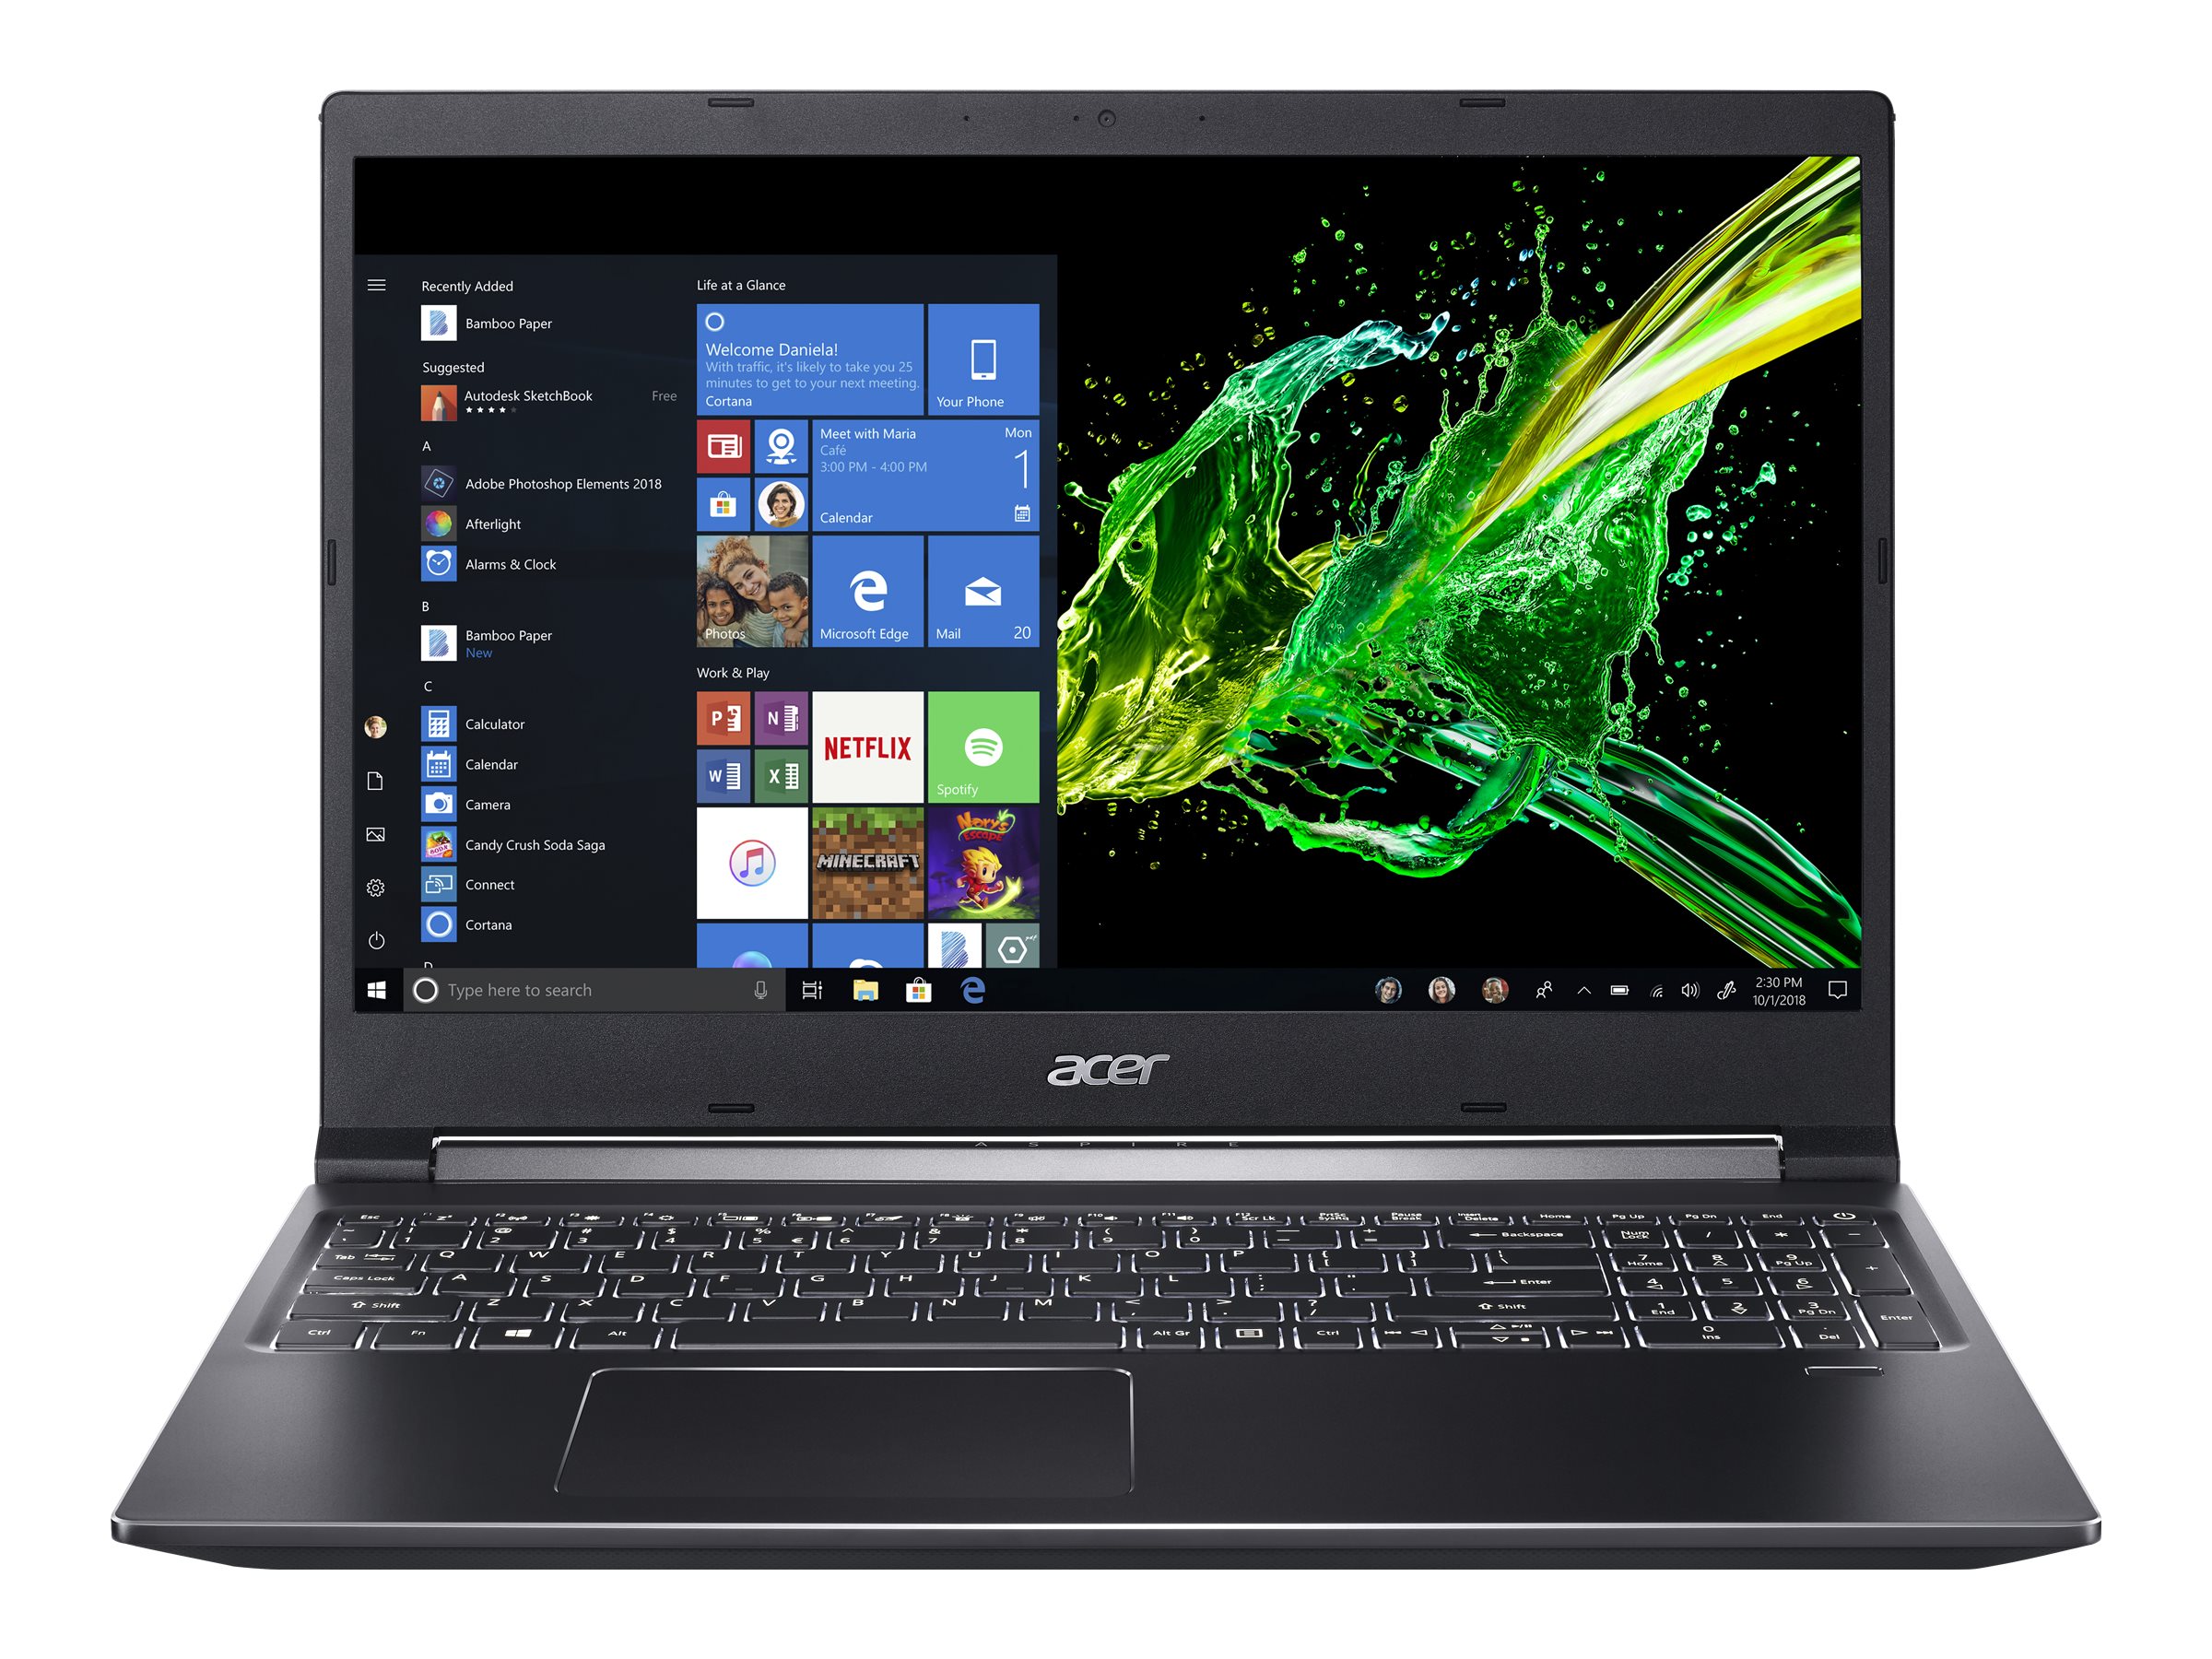 Acer Aspire 7 15.6" Full HD Laptop, Intel Core i7 i7-9750H, 512GB SSD, Windows 10 Home, A715-74G-71WS - image 3 of 8